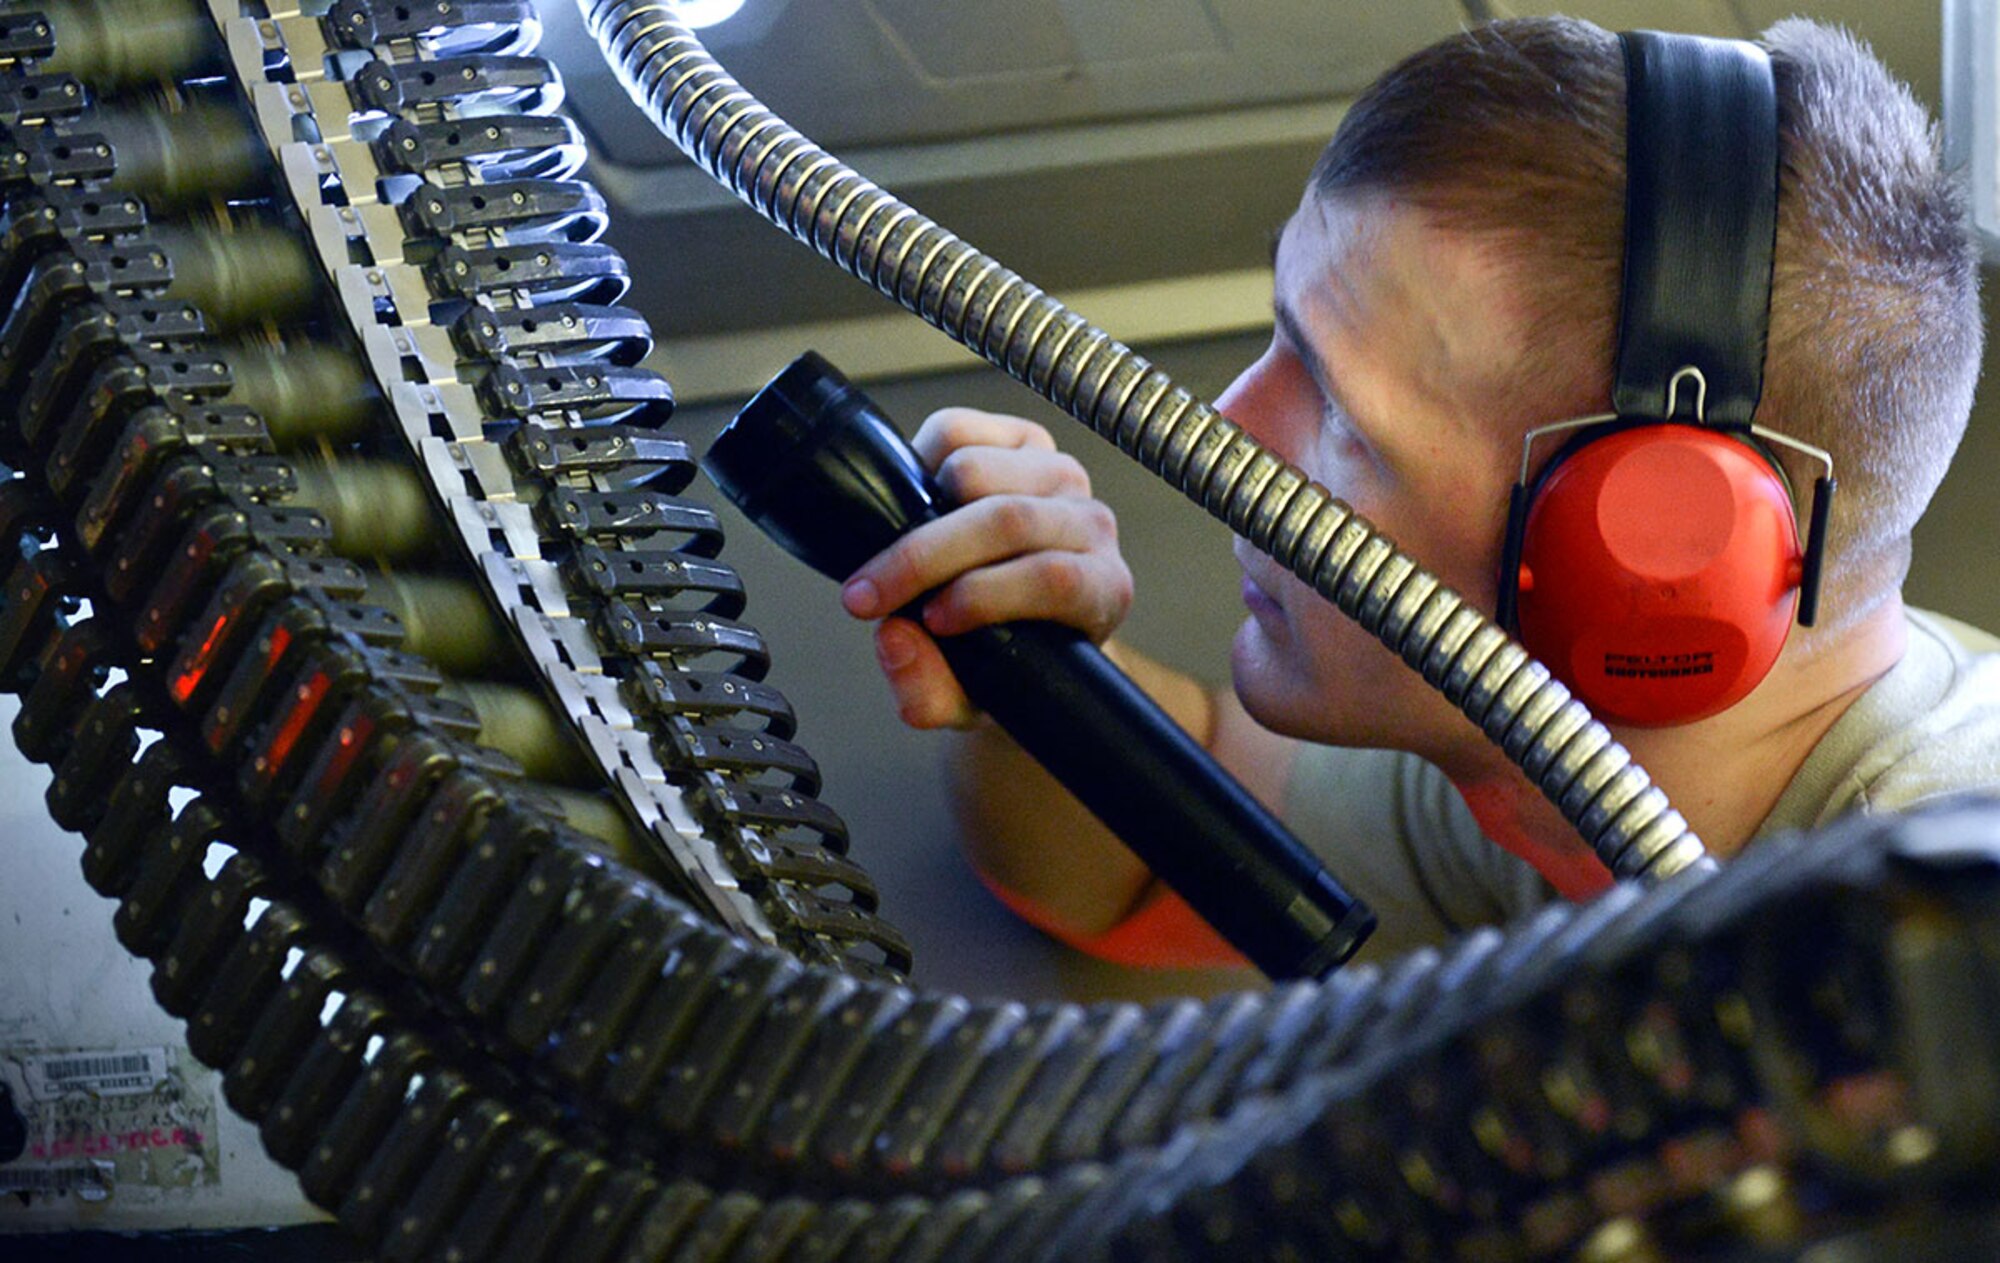 Airman 1st Class Charles Pole, an aircraft armament systems specialist examines his Universal Amunition Loading System (UAL) interface unit during an F-22 Raptor quarterly load competition at Joint Base Elmendorf-Richardson, Alaska, December 31, 2014. The winners of the match move on to the annual competition. (U.S. Air Force Photo by Airman 1st Class Kyle Johnson)